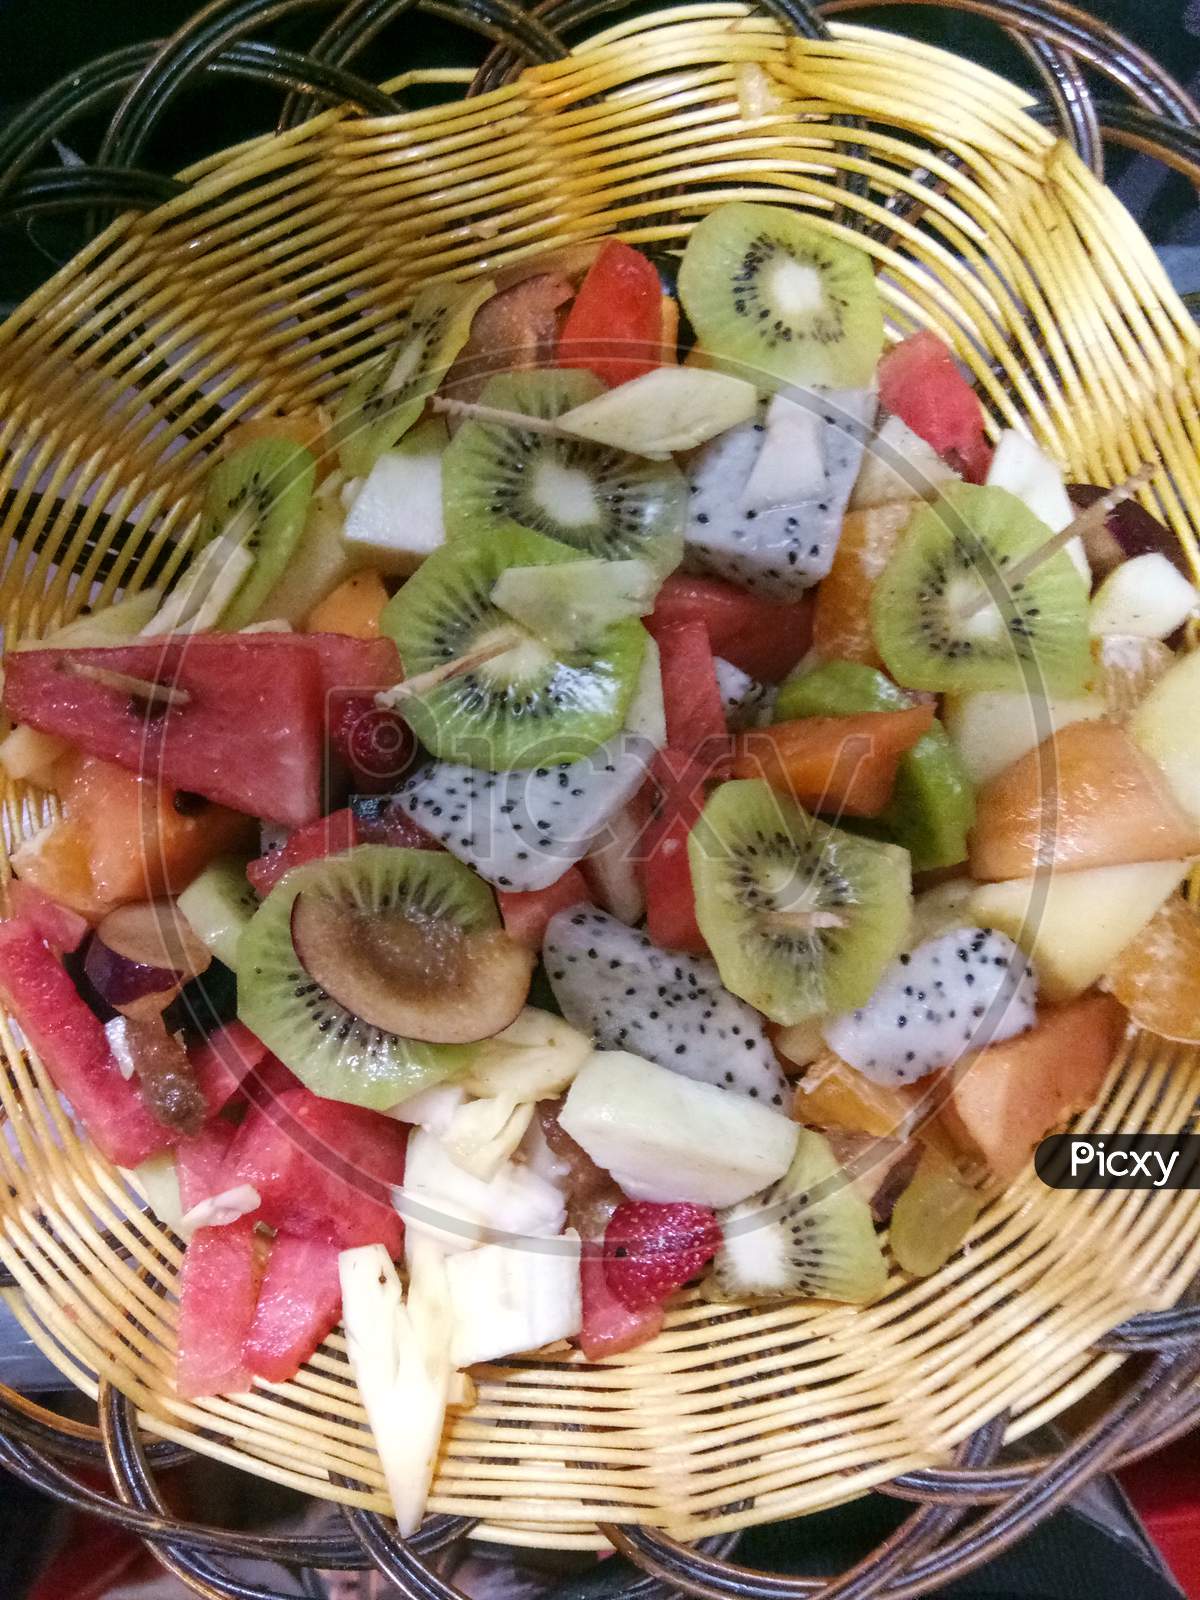 Delicious fruit dish- small fruit pieces